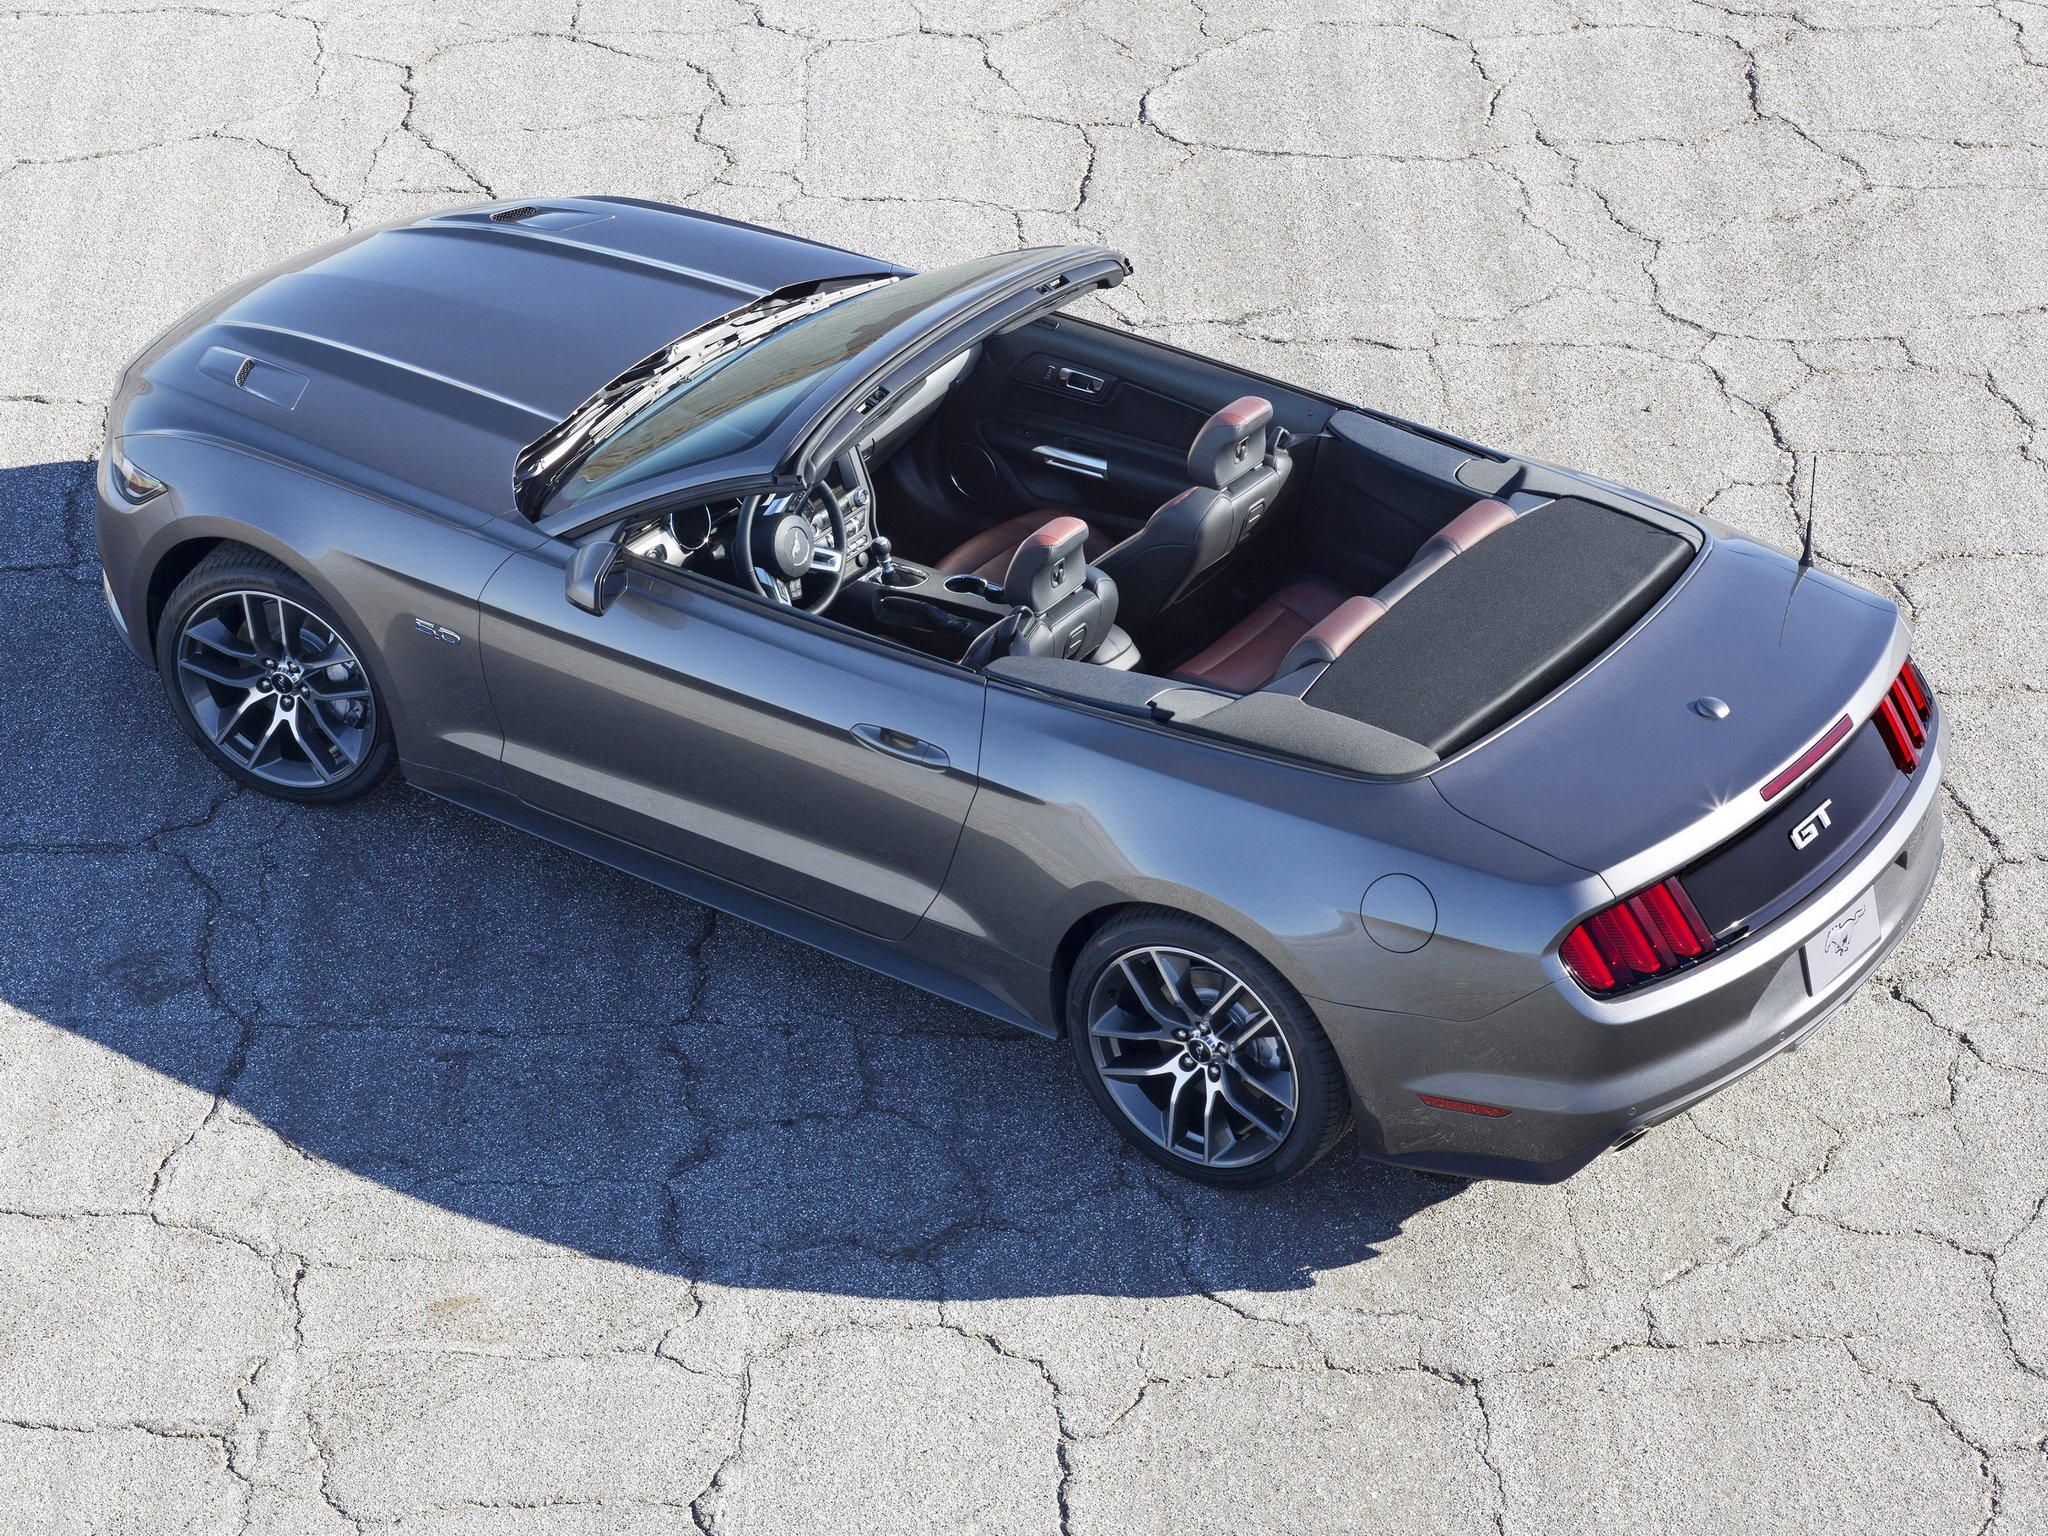 2014, Ford, Mustang, G t, Convertible, Muscle, Interior Wallpaper